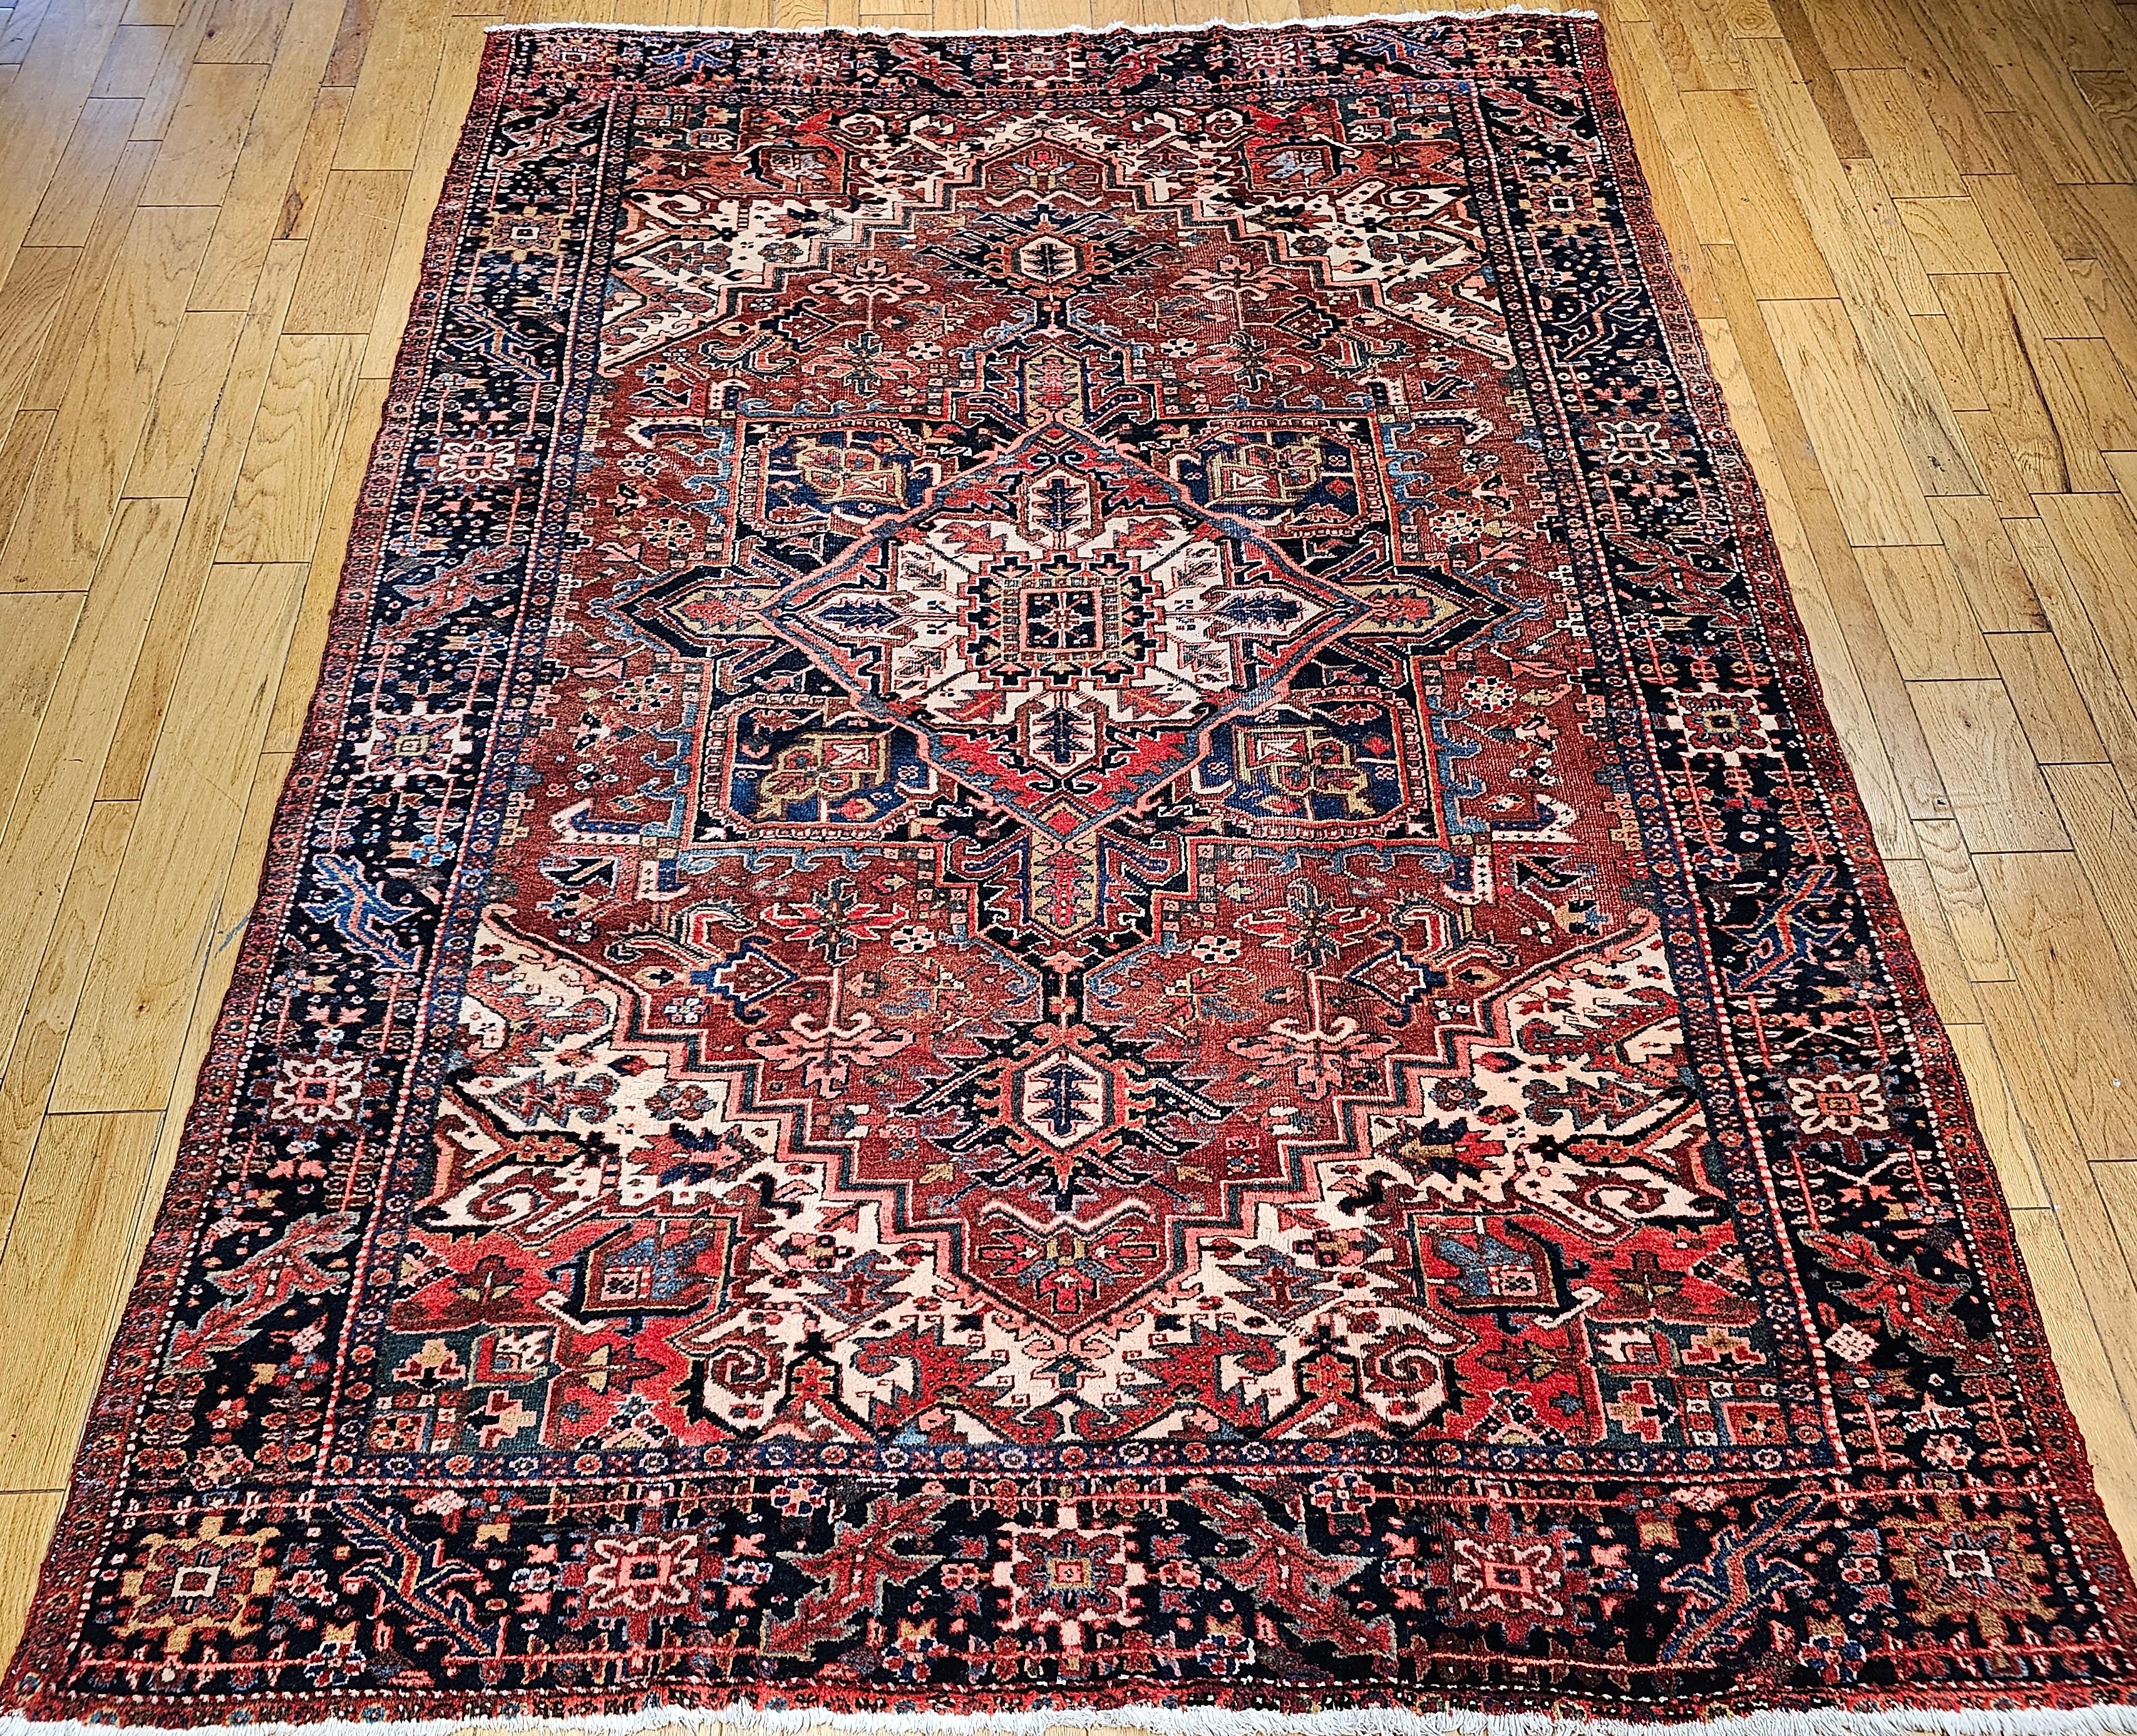 A beautiful Heriz room size rug from the village of Karajah in the Azerbaijan region of NW Persia circa the early 1900s It has a rich brick-red field color and a center medallion in ivory, blue and yellow which makes the medallion stand out. The